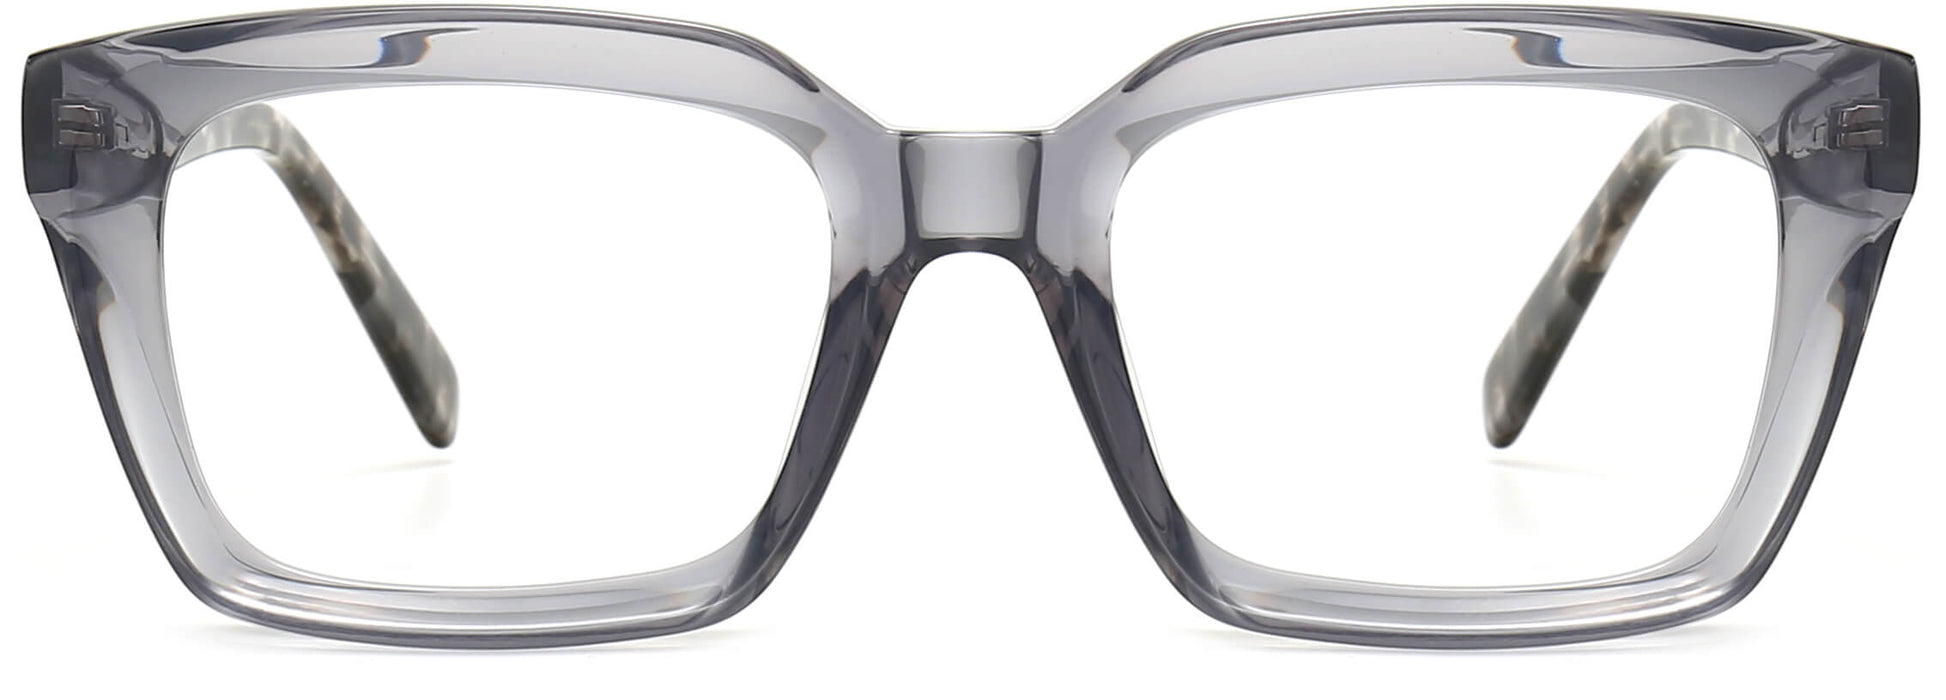 Aron Square Gray Eyeglasses from ANRRI,front view